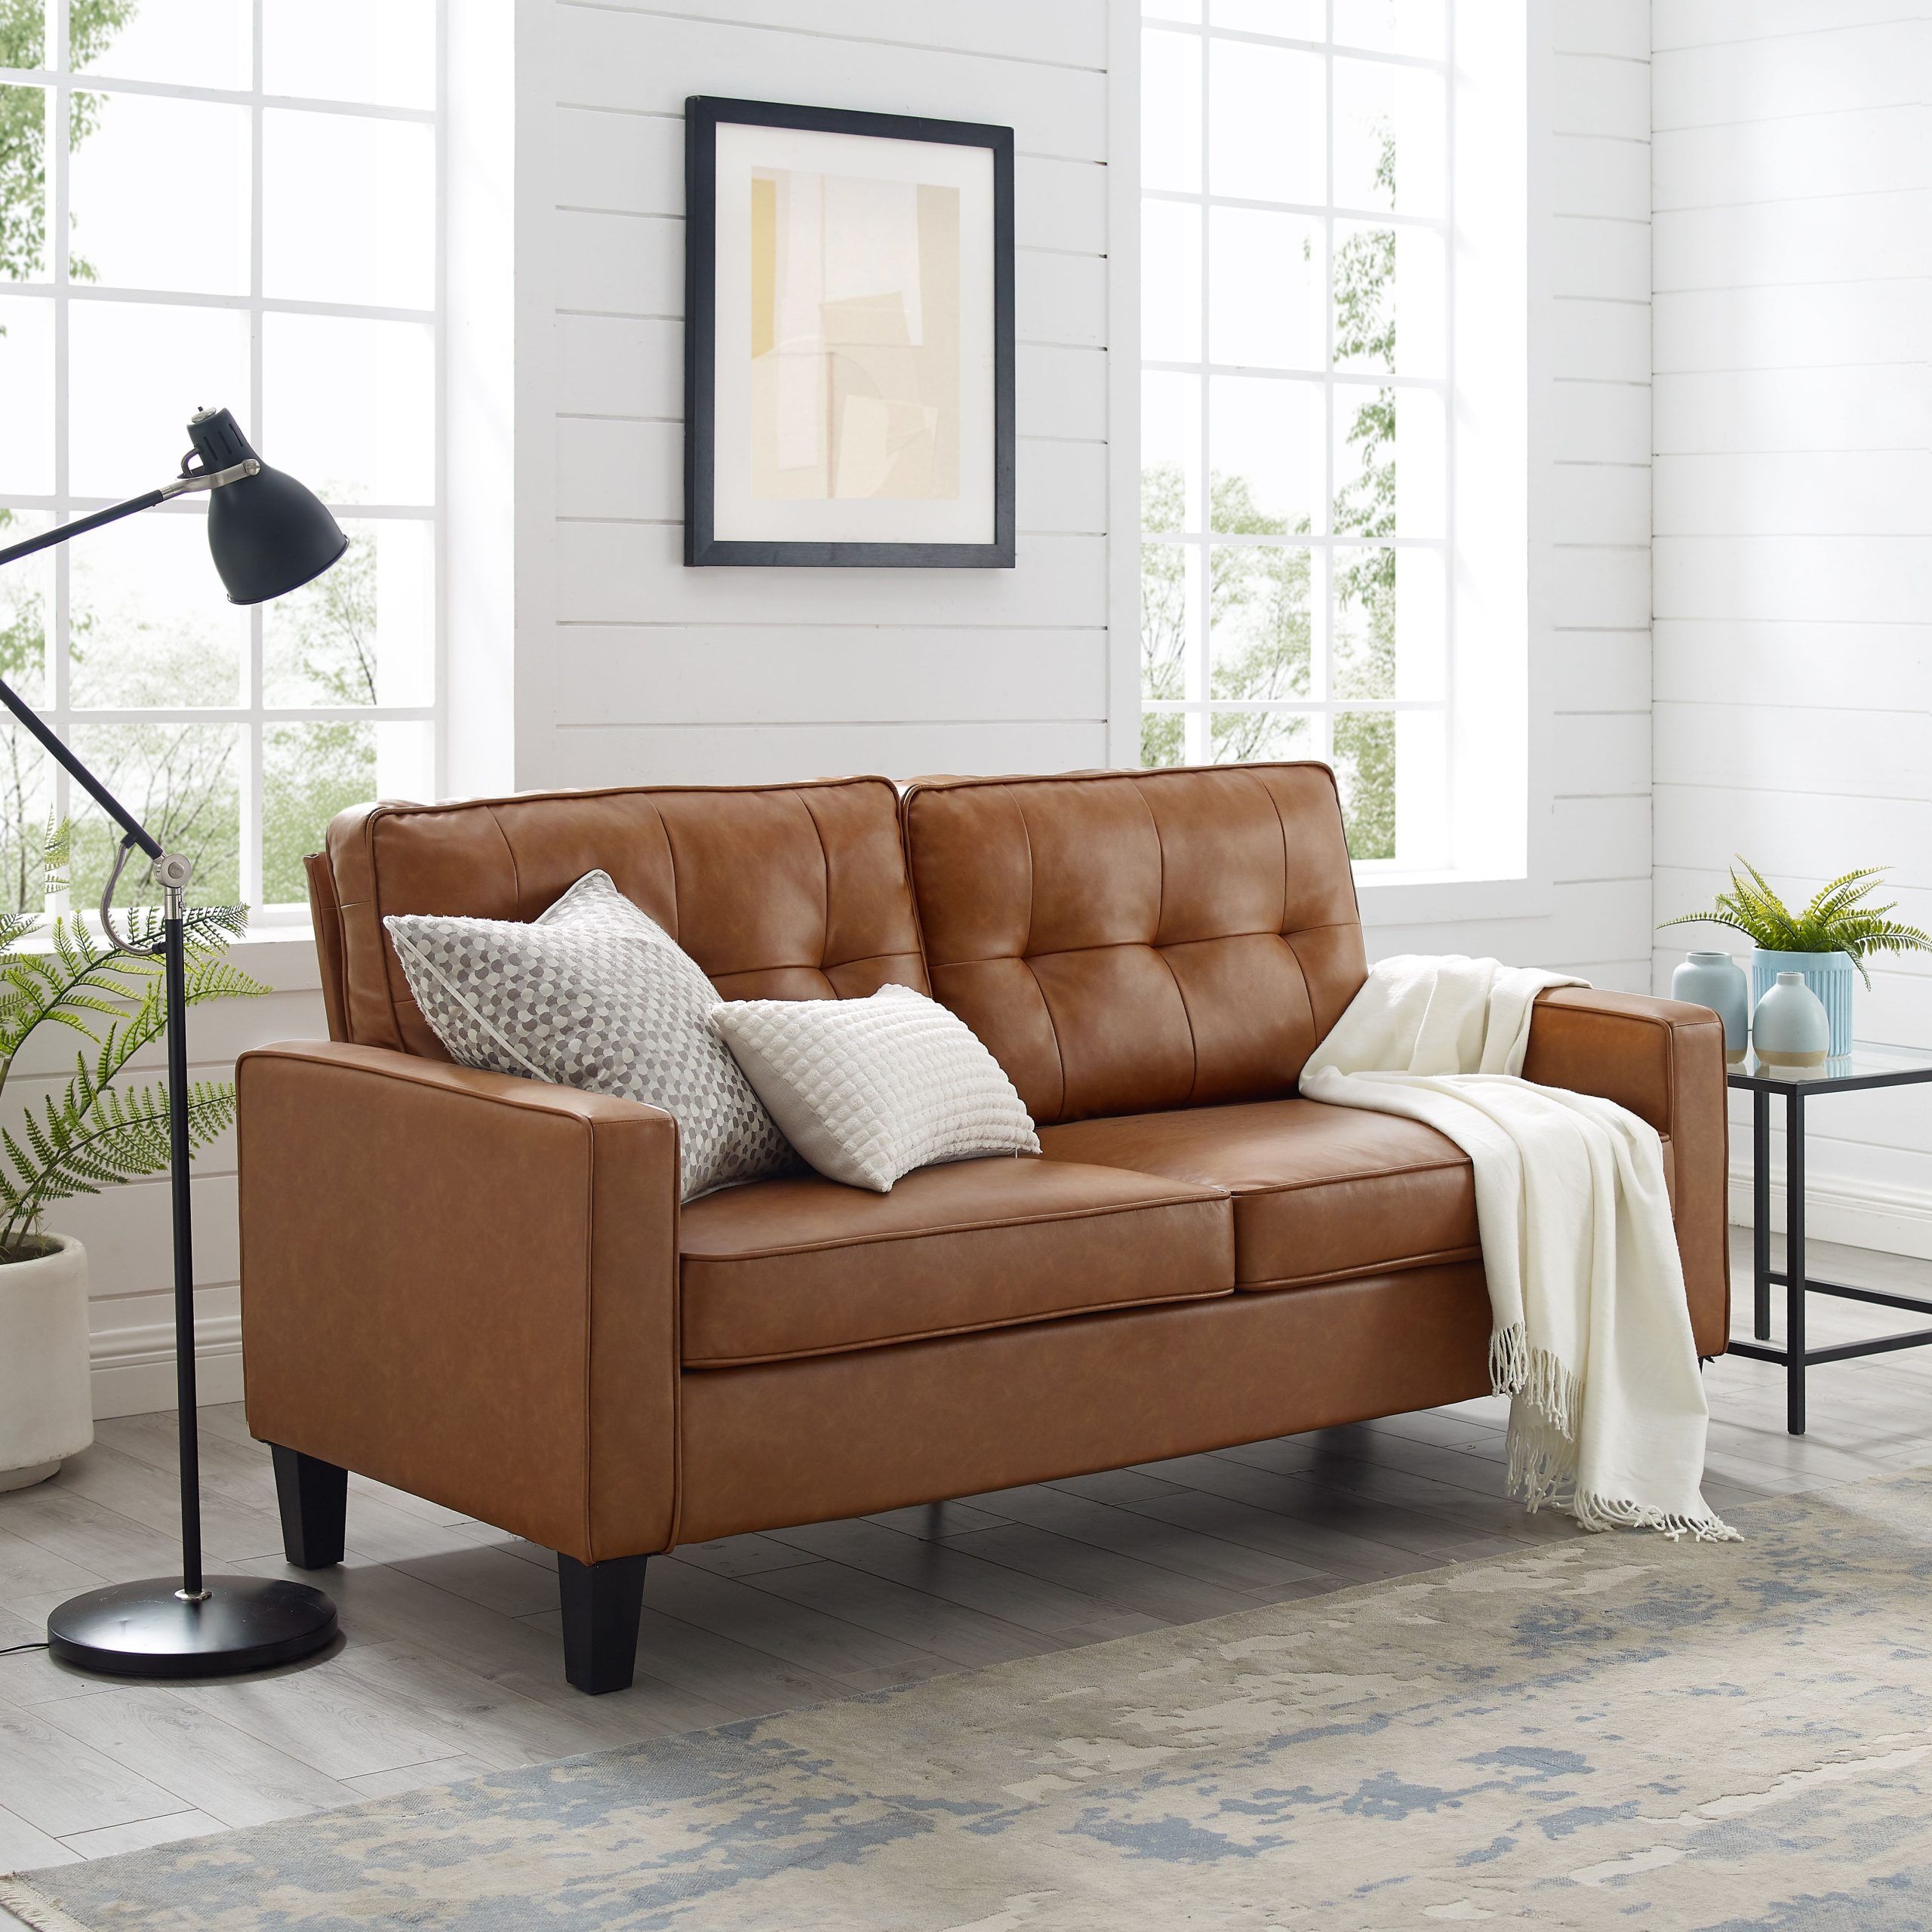 Mainstays Faux Leather Apartment Sofa Brown – Walmart With Regard To Faux Leather Sofas In Dark Brown (Gallery 1 of 20)